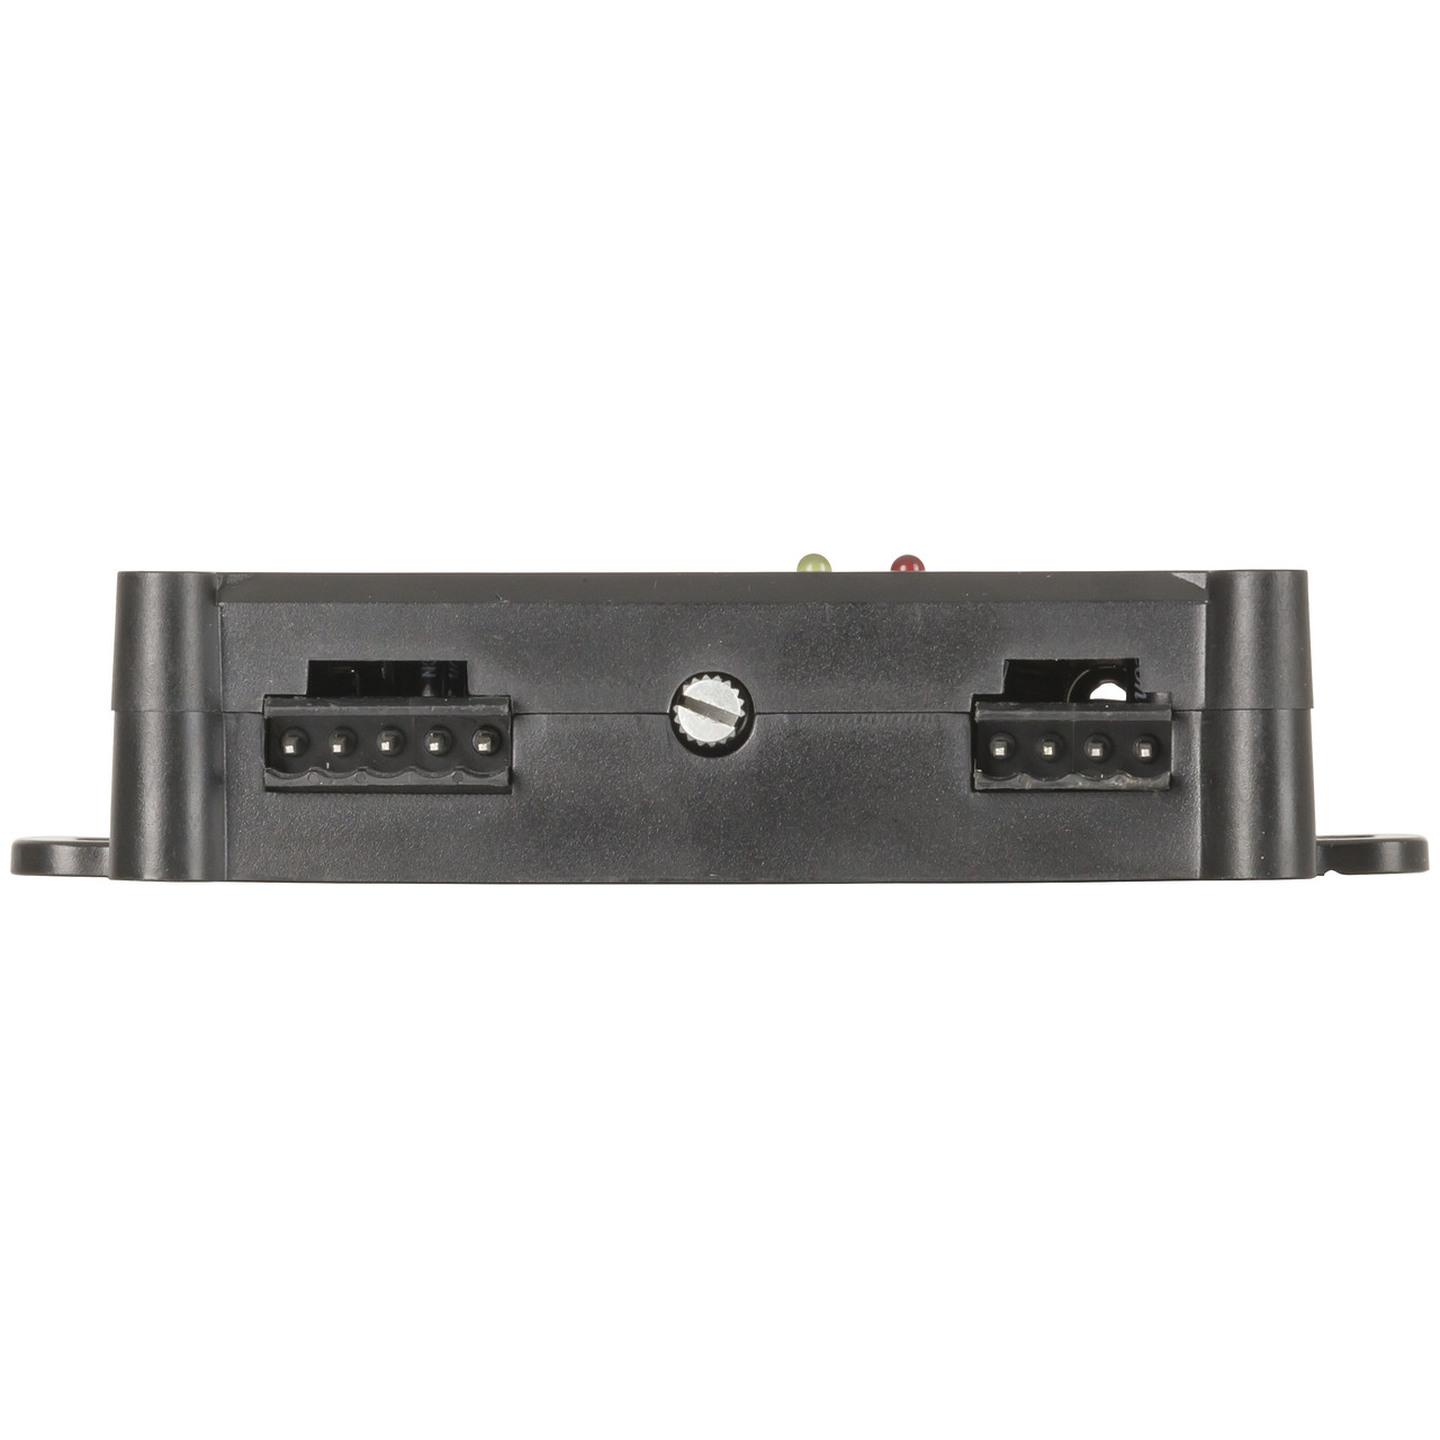 4 Channel High Quality Line Level Converter